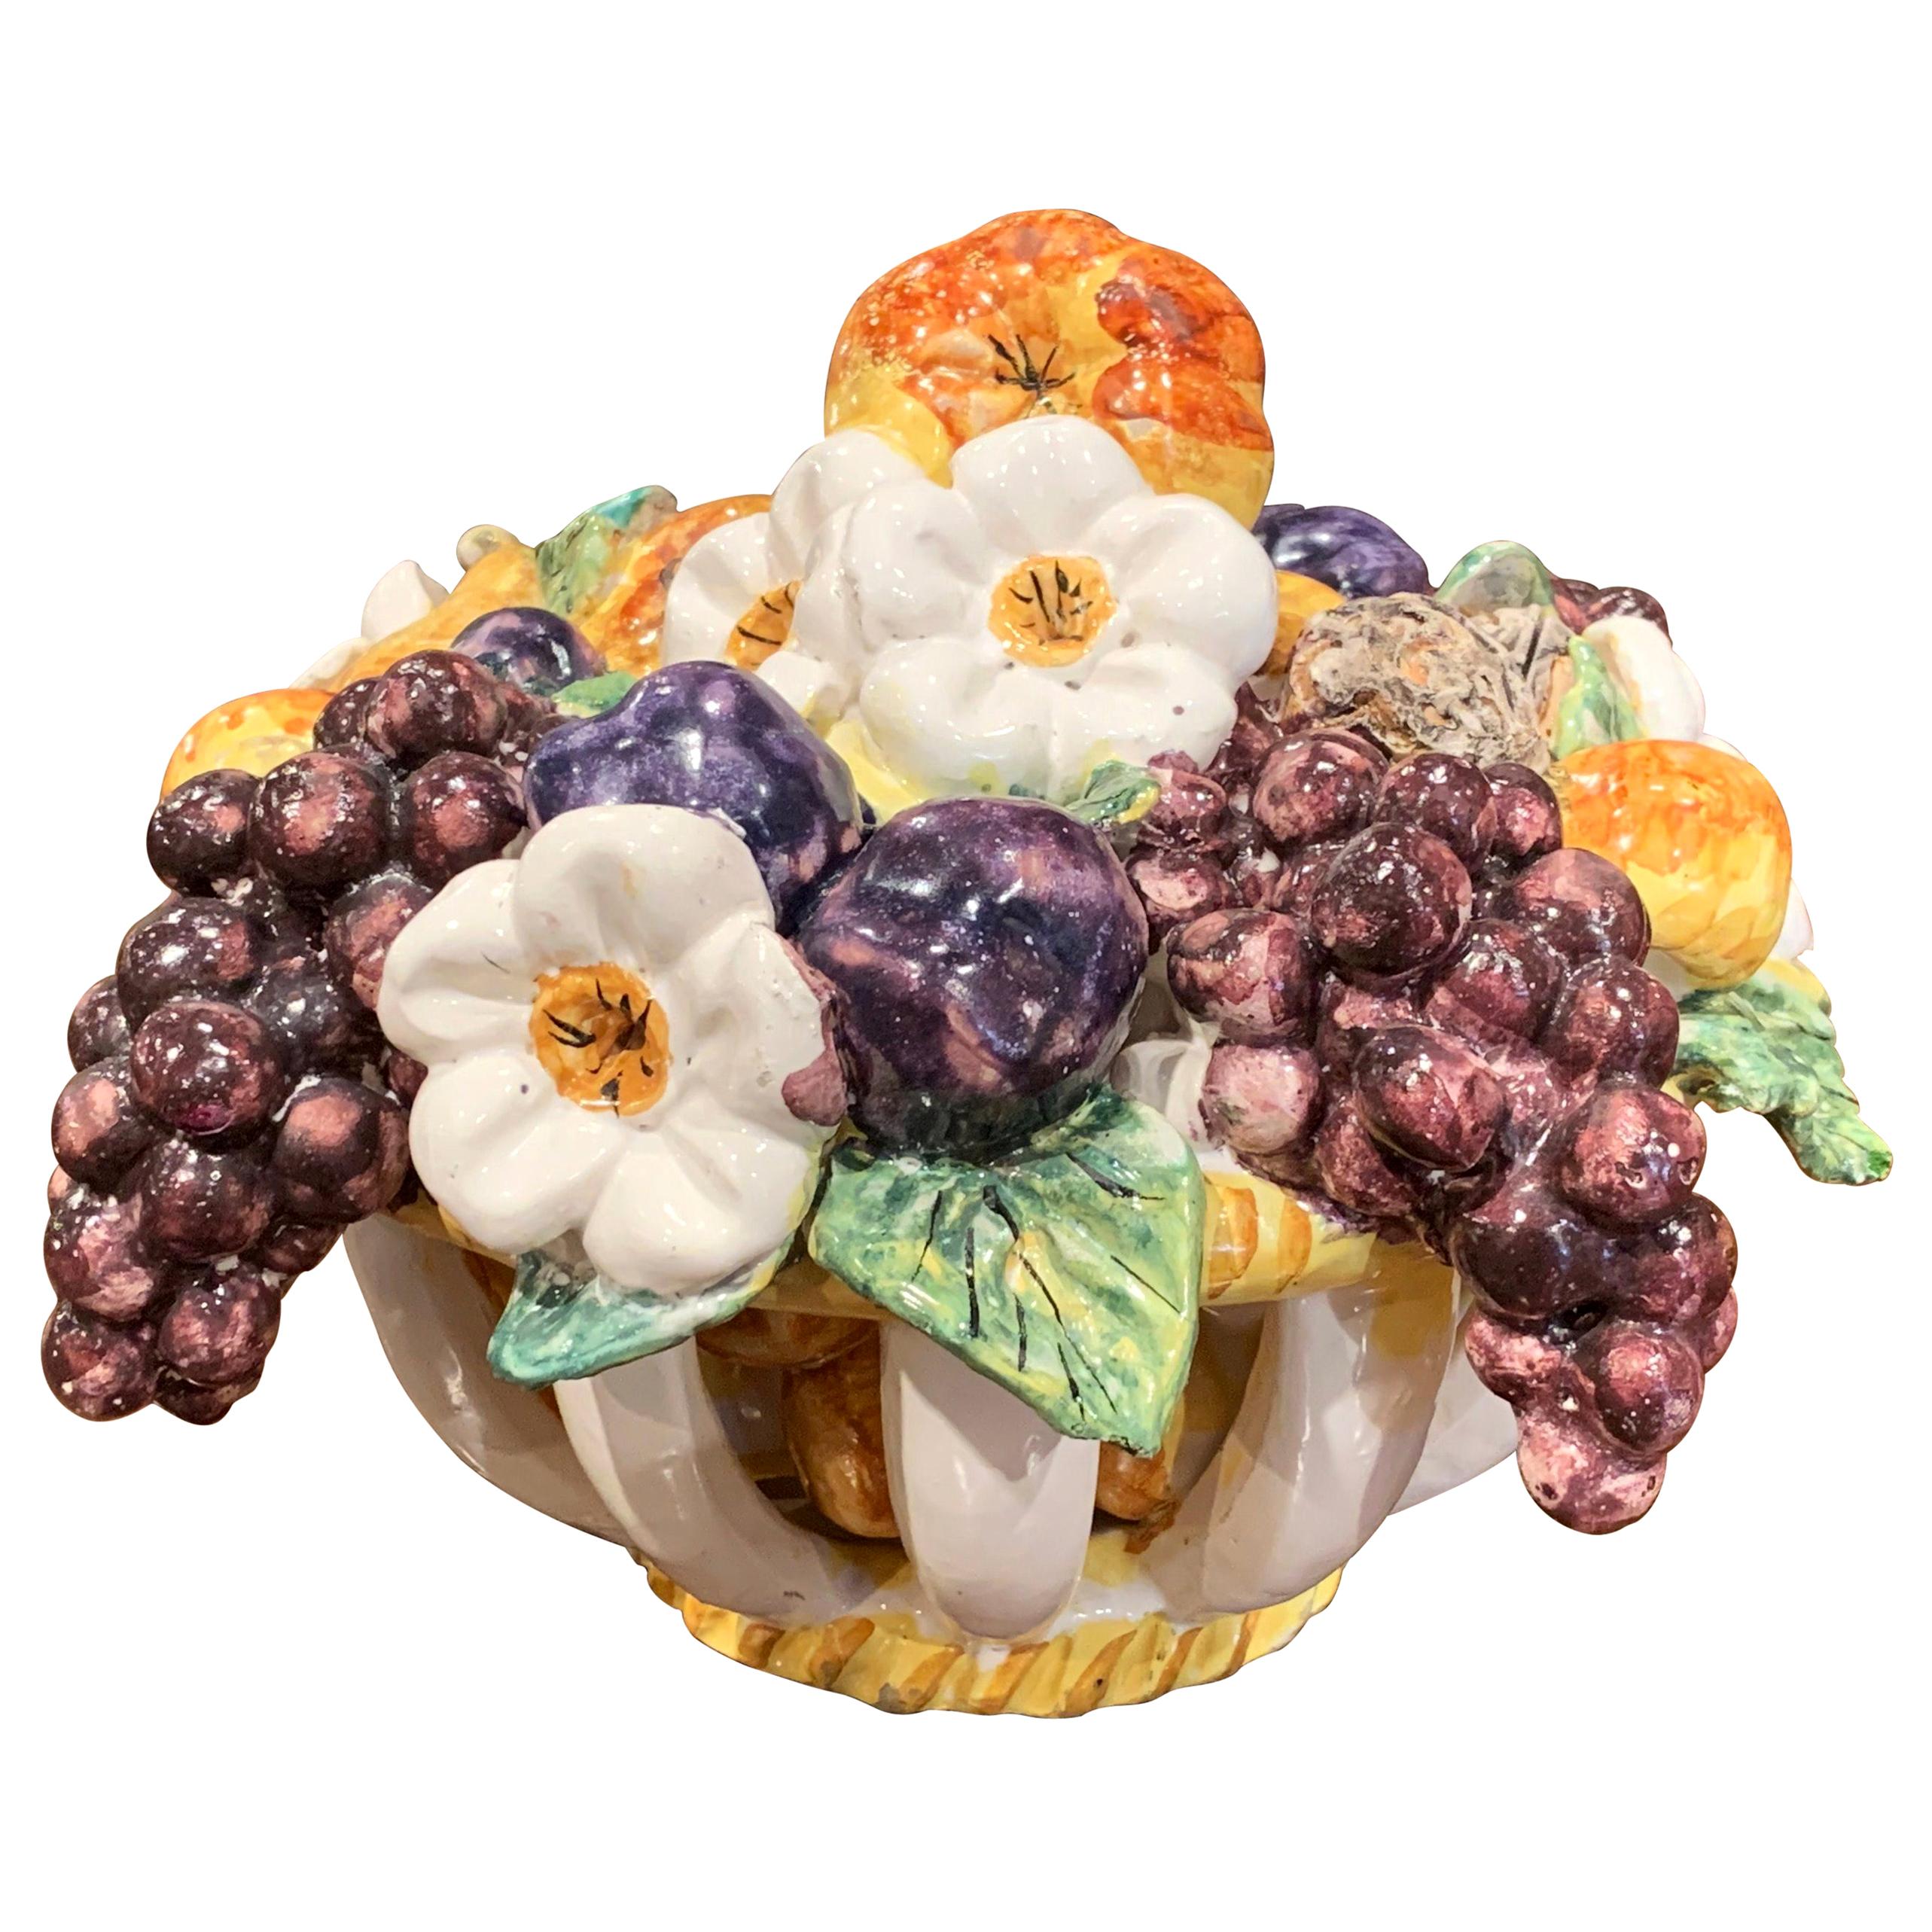 Mid-20th Century French Painted Ceramic Barbotine Fruit Basket Composition